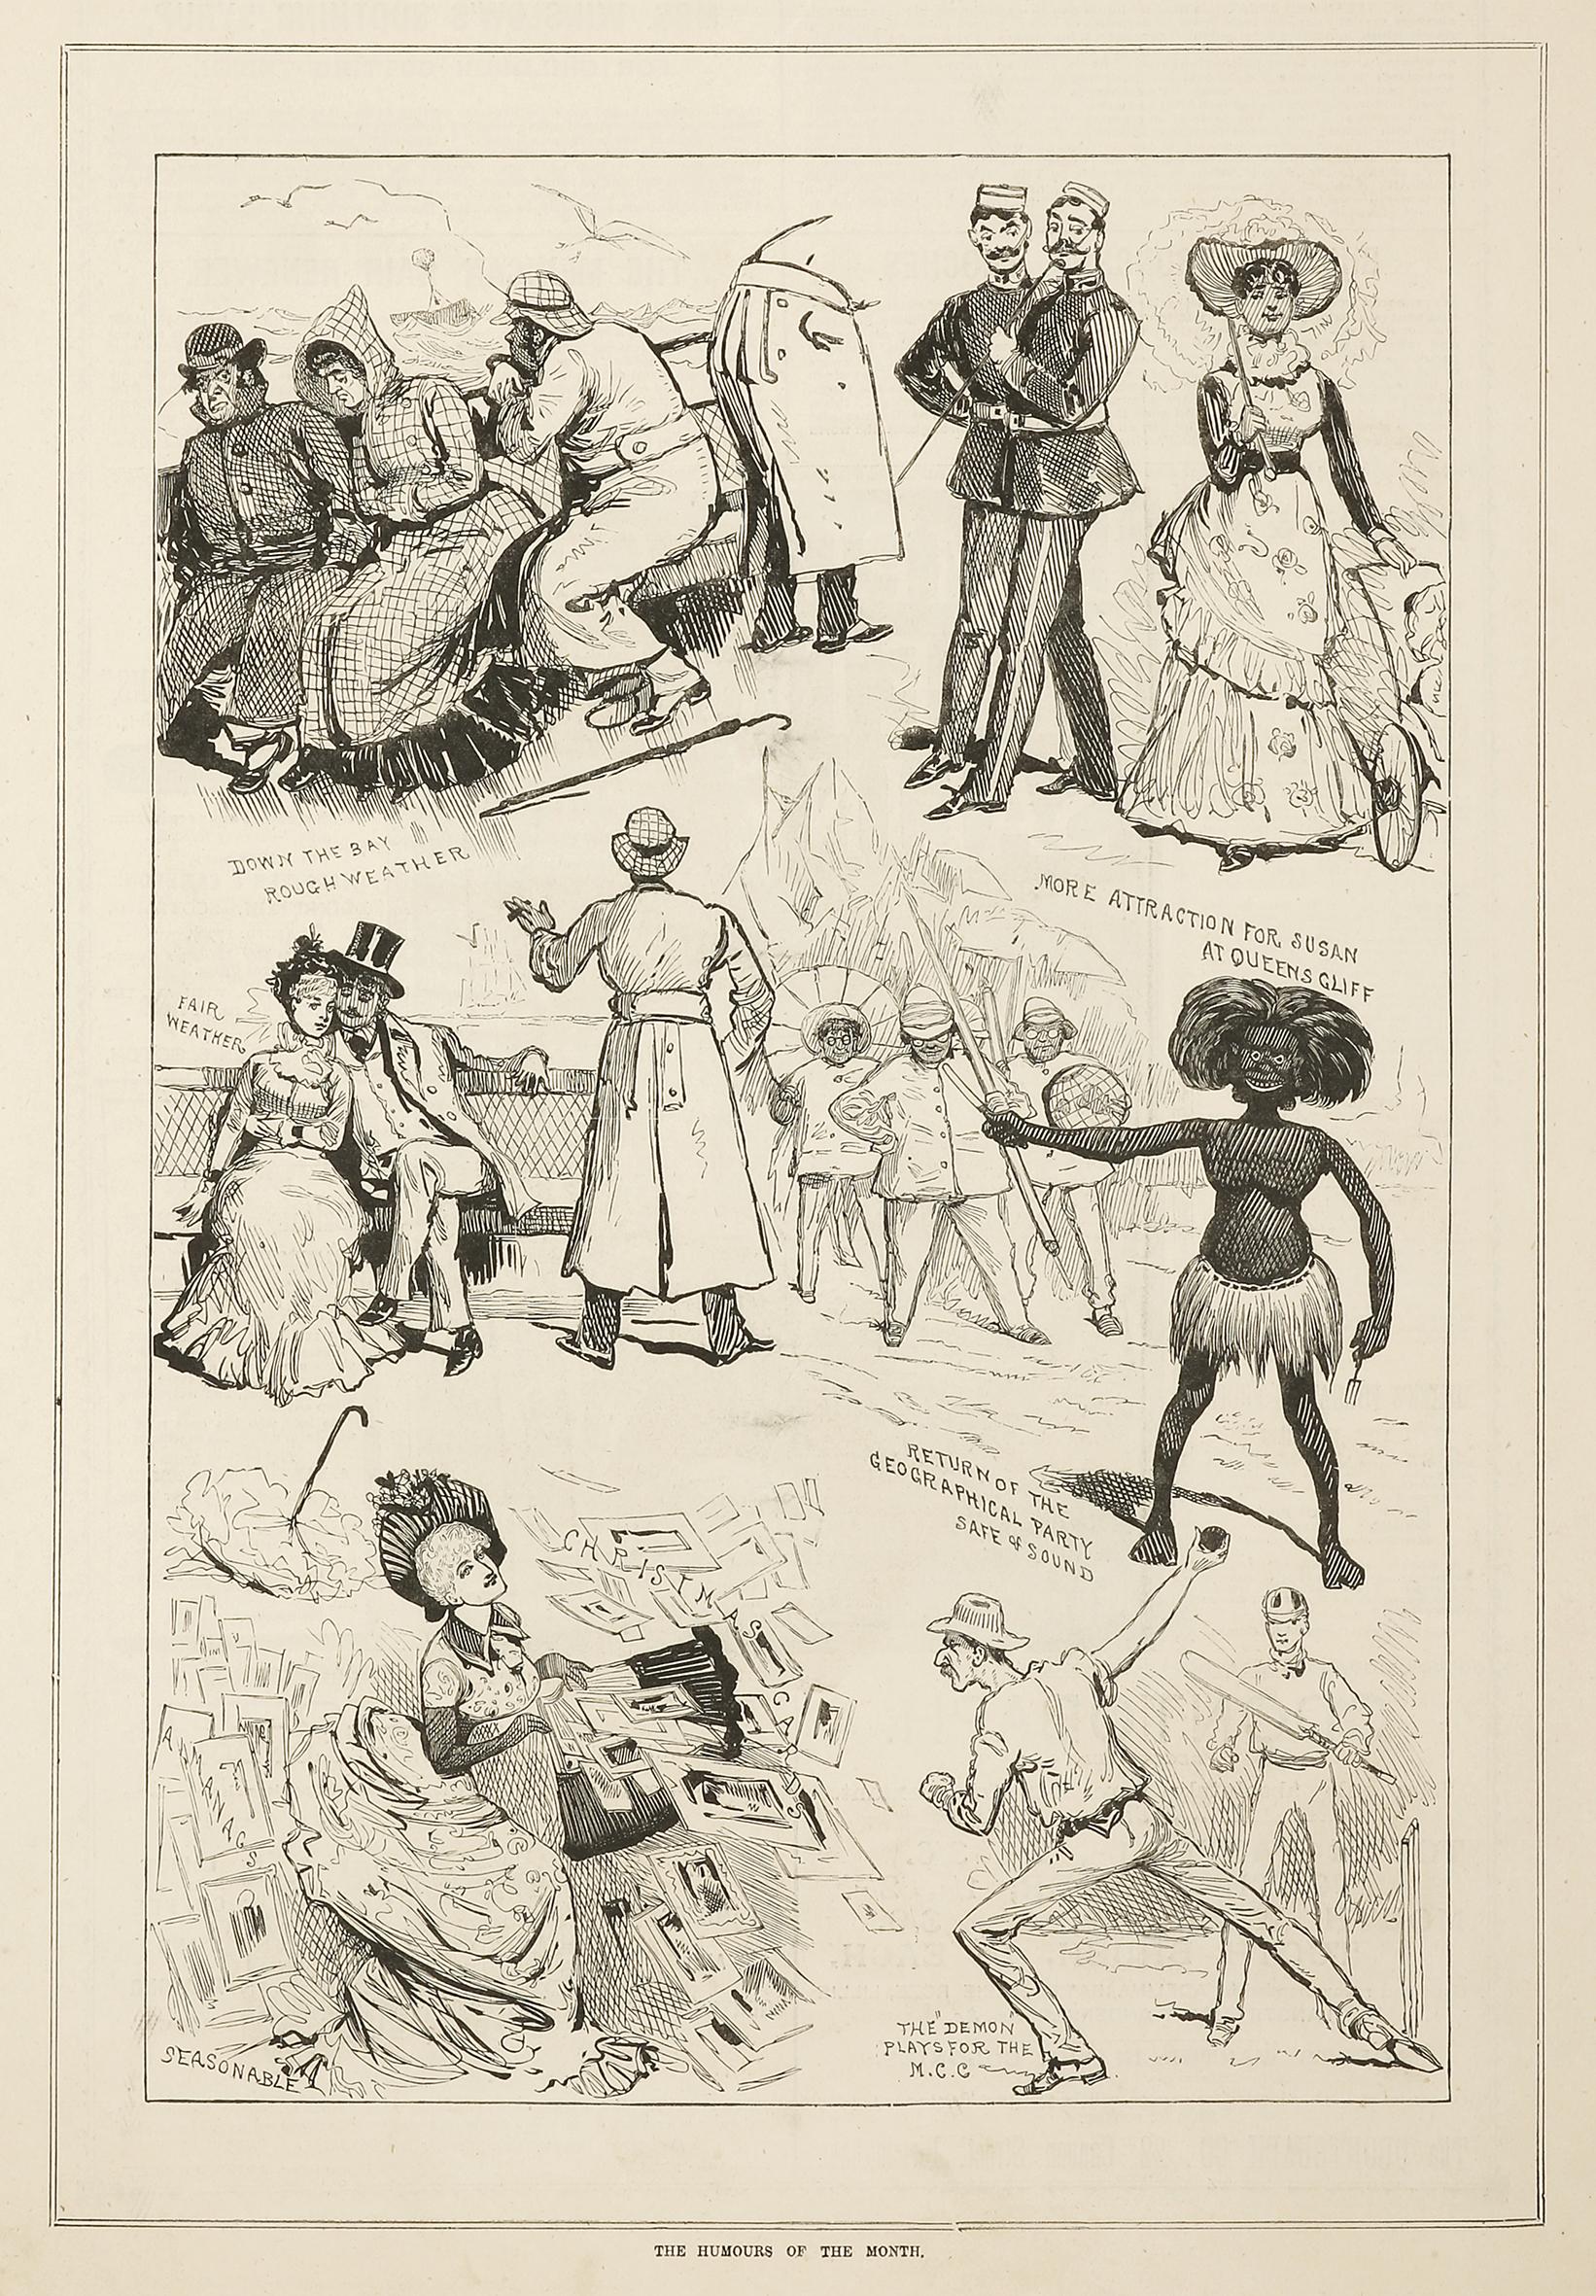 The Humours of the Month. - Antique Print from 1885